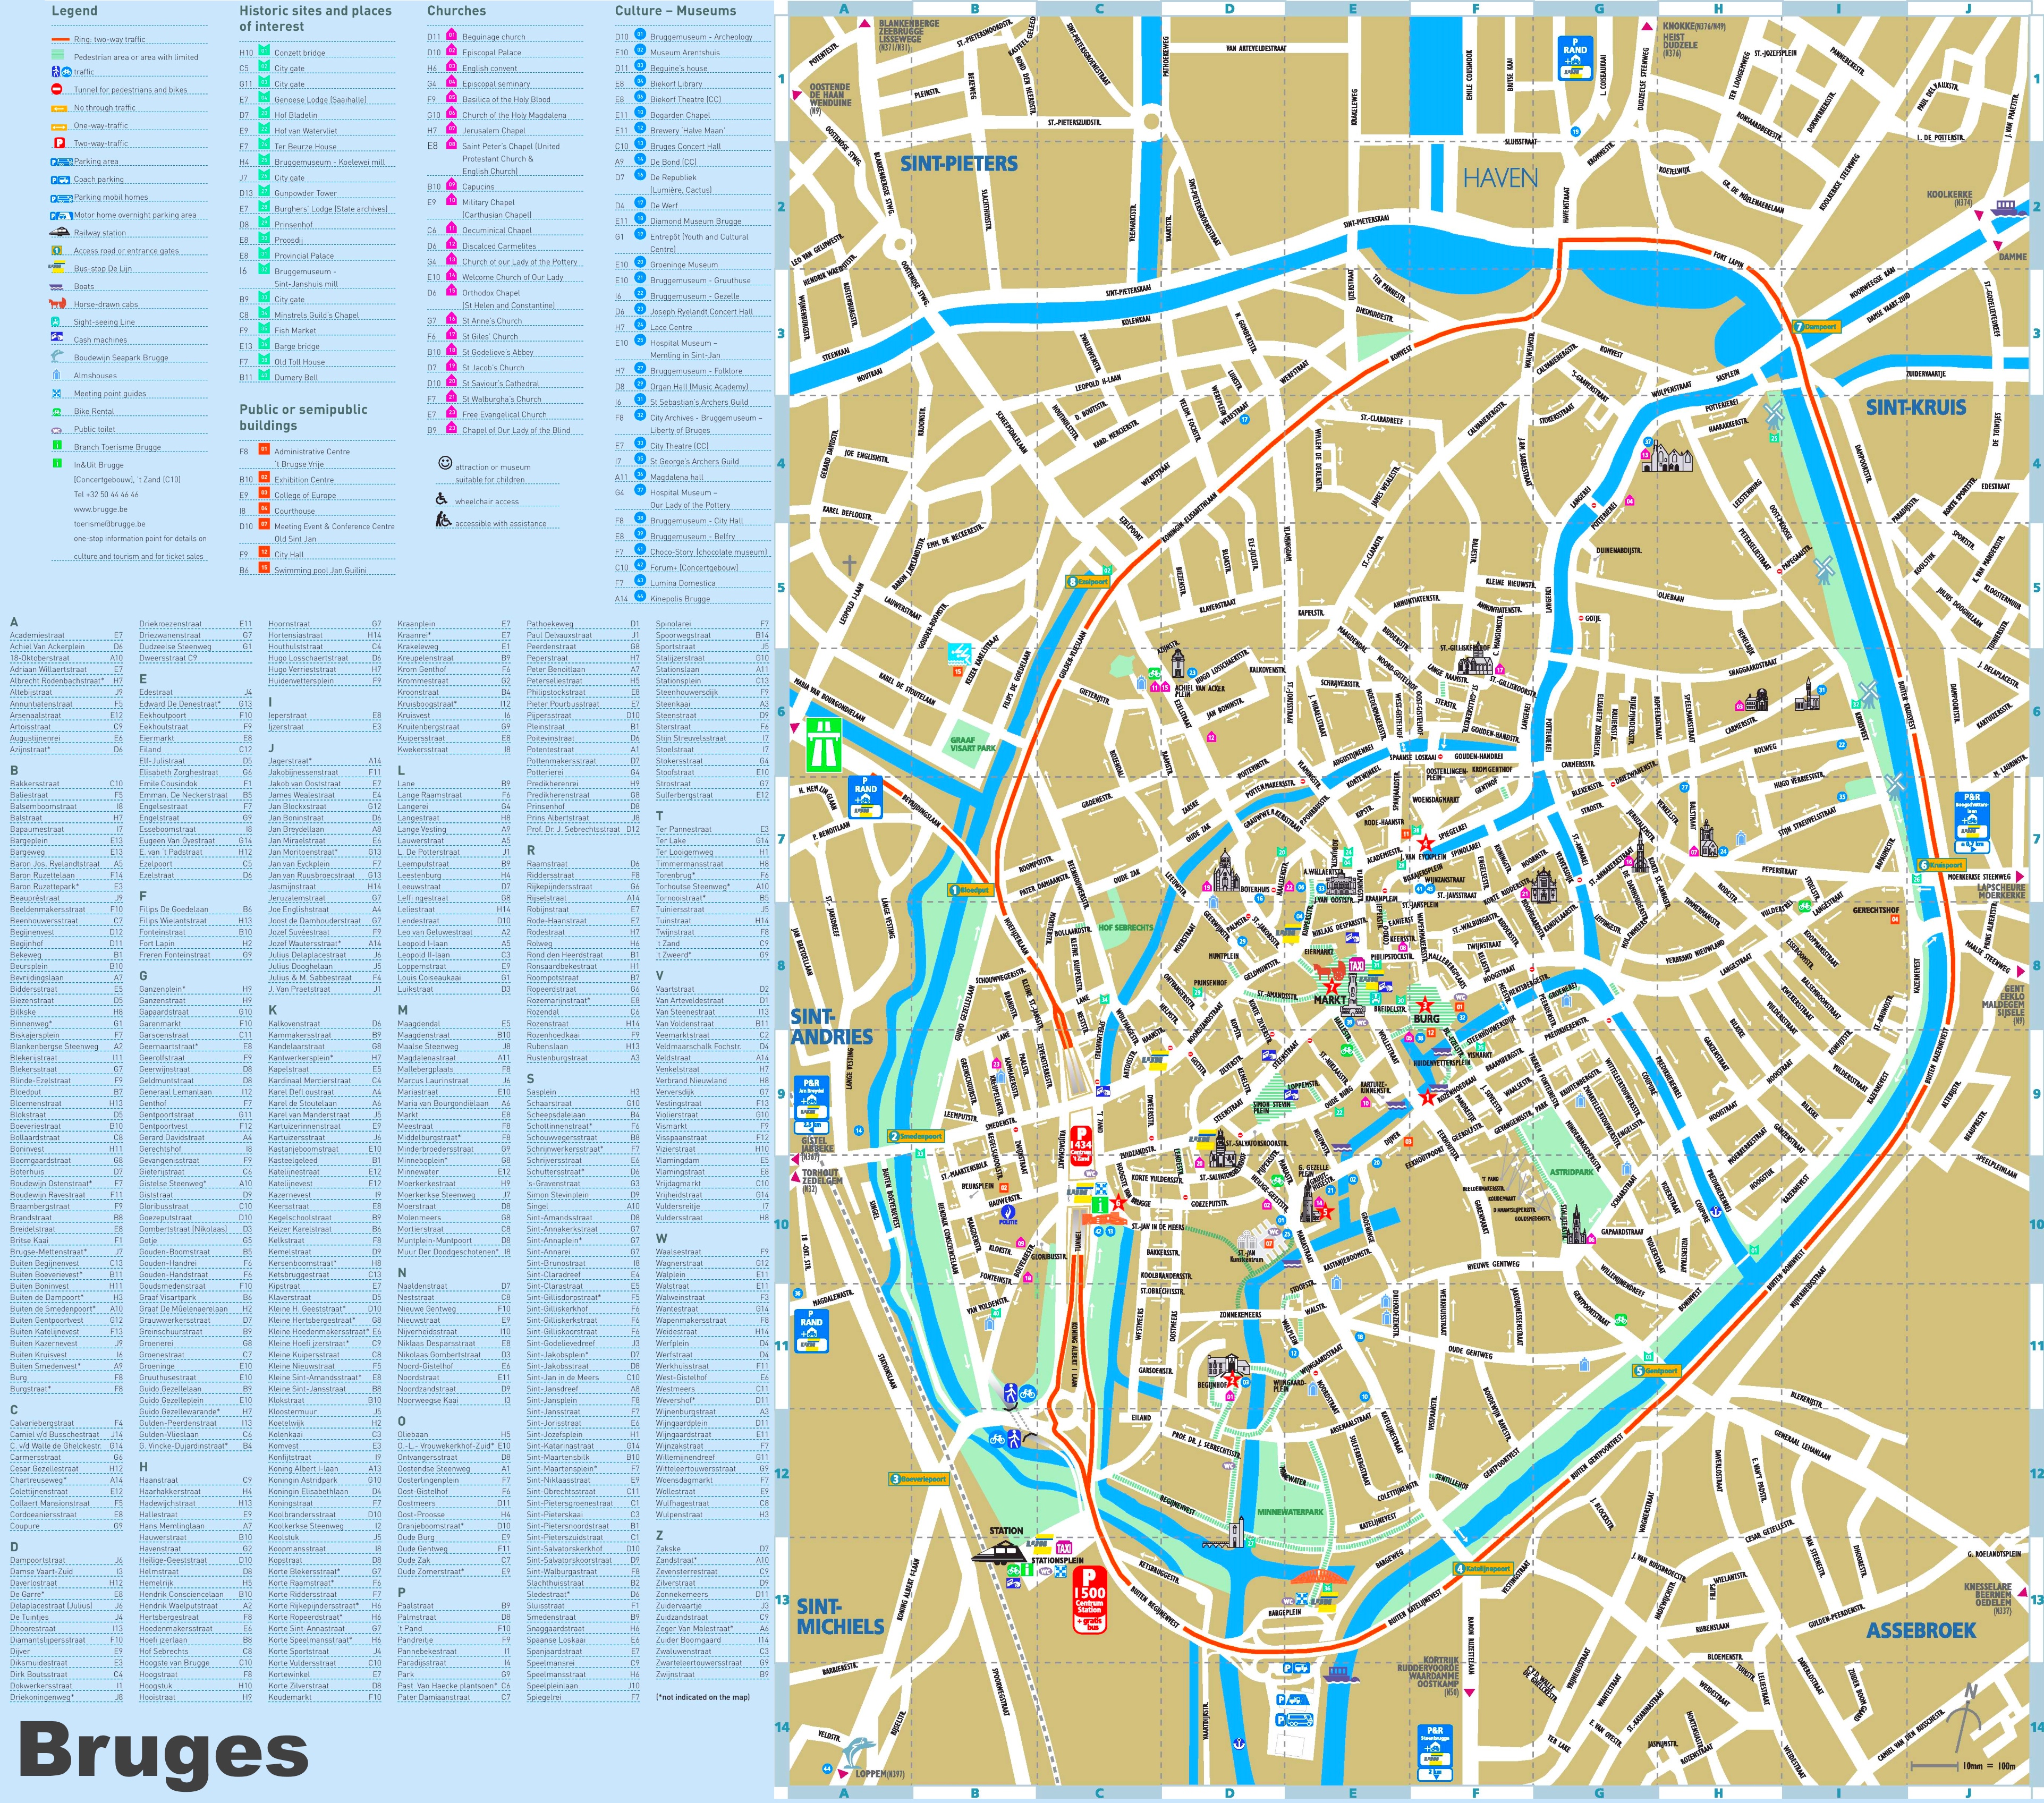 bruges-tourist-attractions-map.jpg